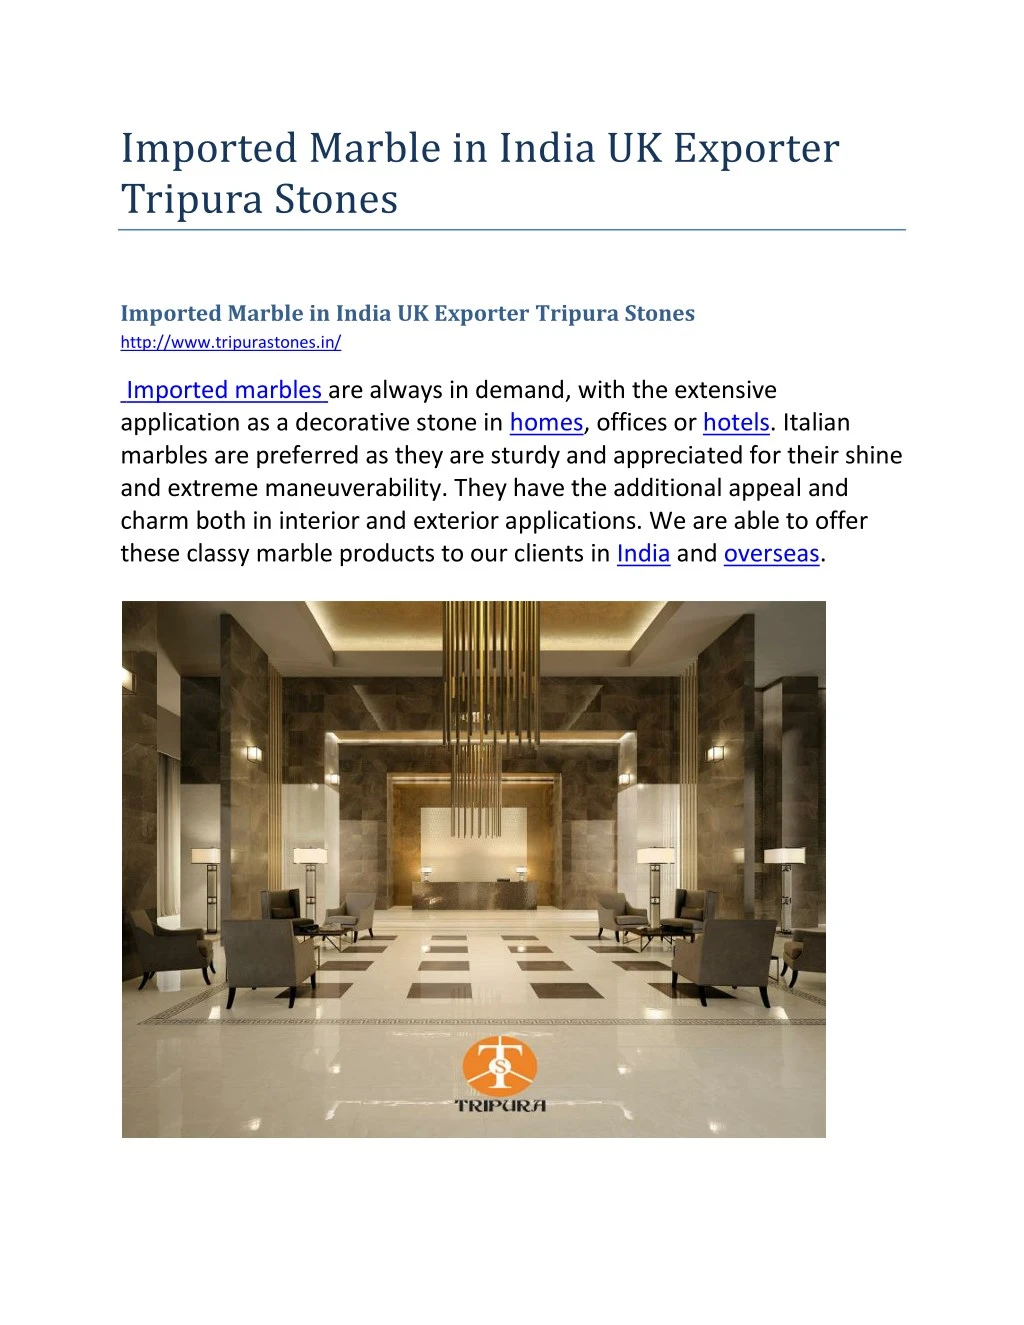 imported marble in india uk exporter tripura